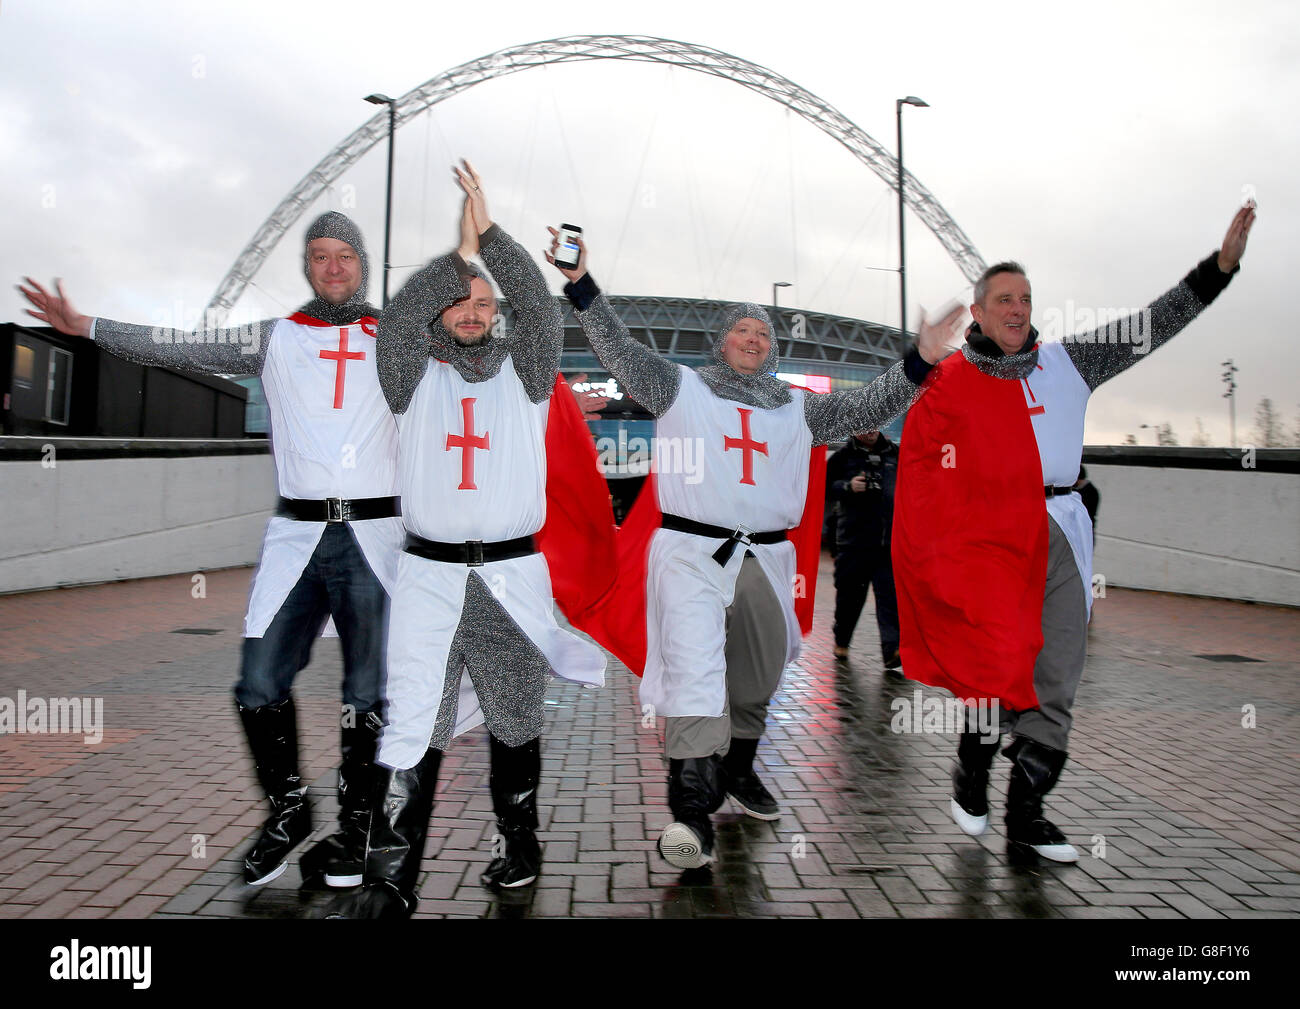 England fans show their support dressed as Templar knights outside the ground before the international friendly match at Wembley Stadium, London. PRESS ASSOCIATION Photo. Picture date: Tuesday November 17, 2015. See PA story SOCCER England. Photo credit should read: Nick Potts/PA Wire. Stock Photo